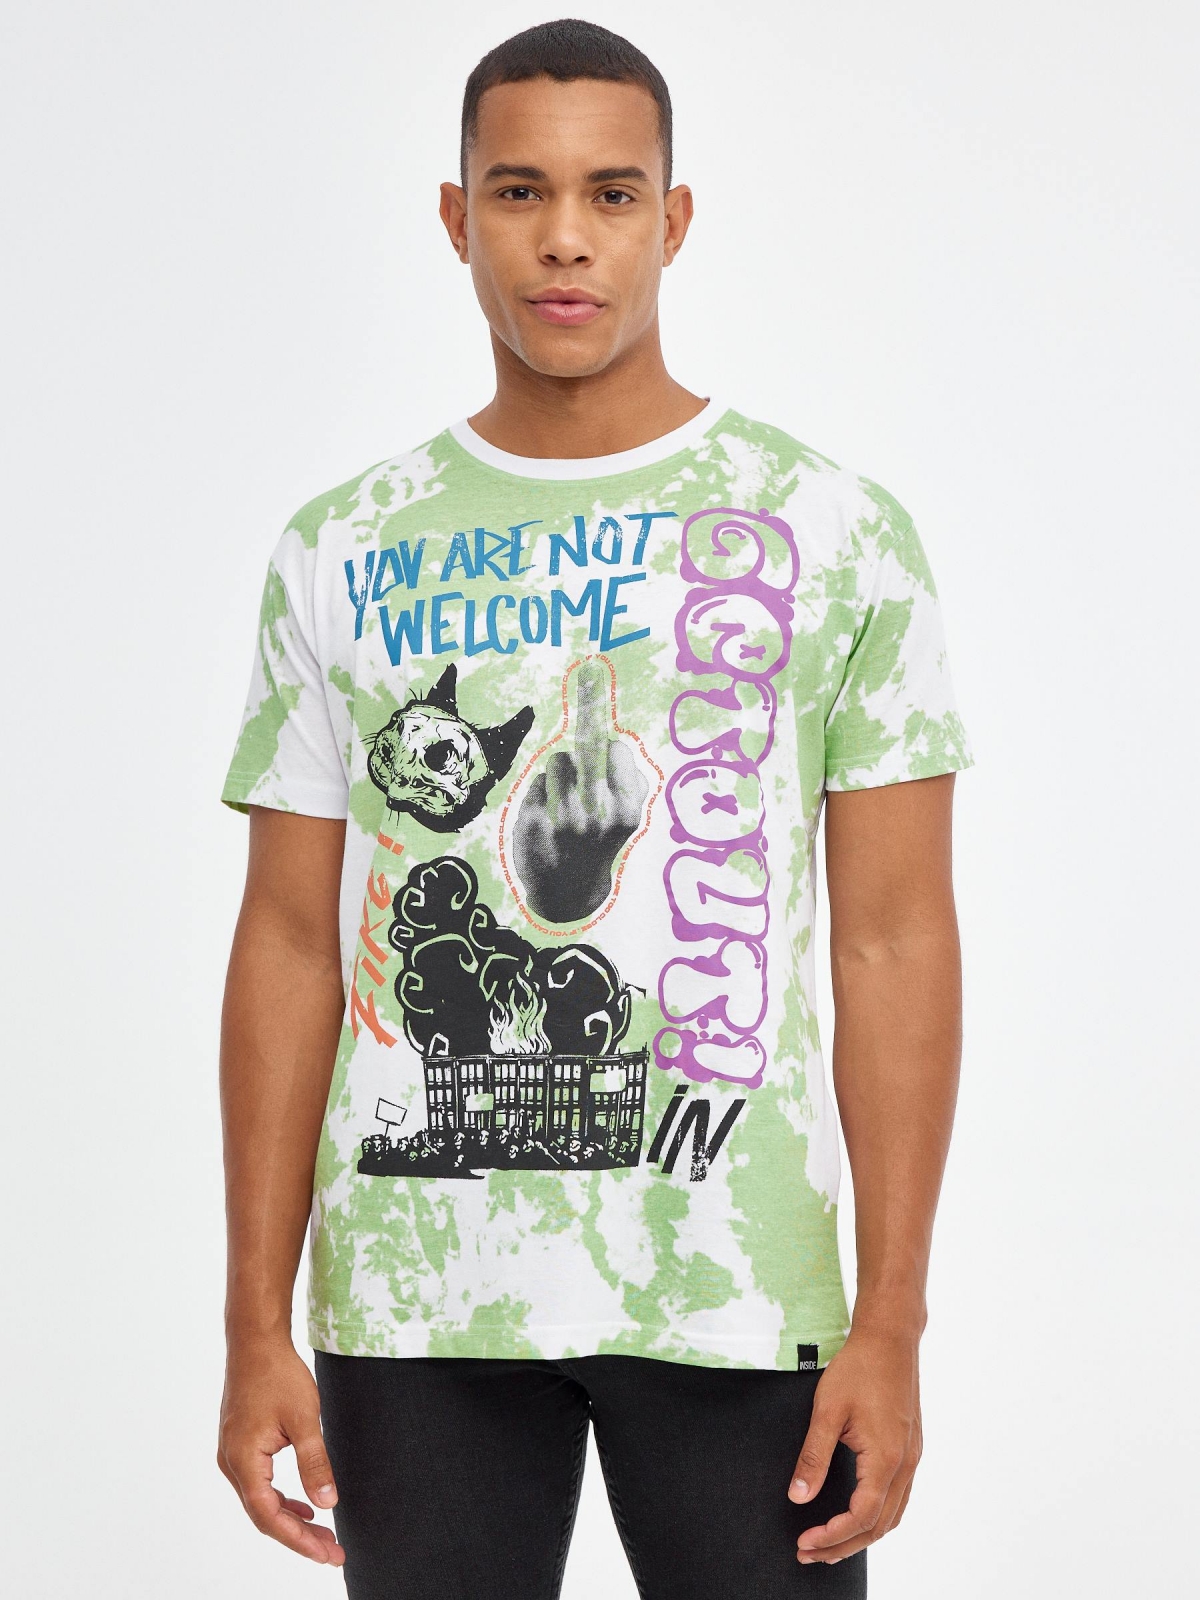 Not Welcome T-shirt light green middle front view